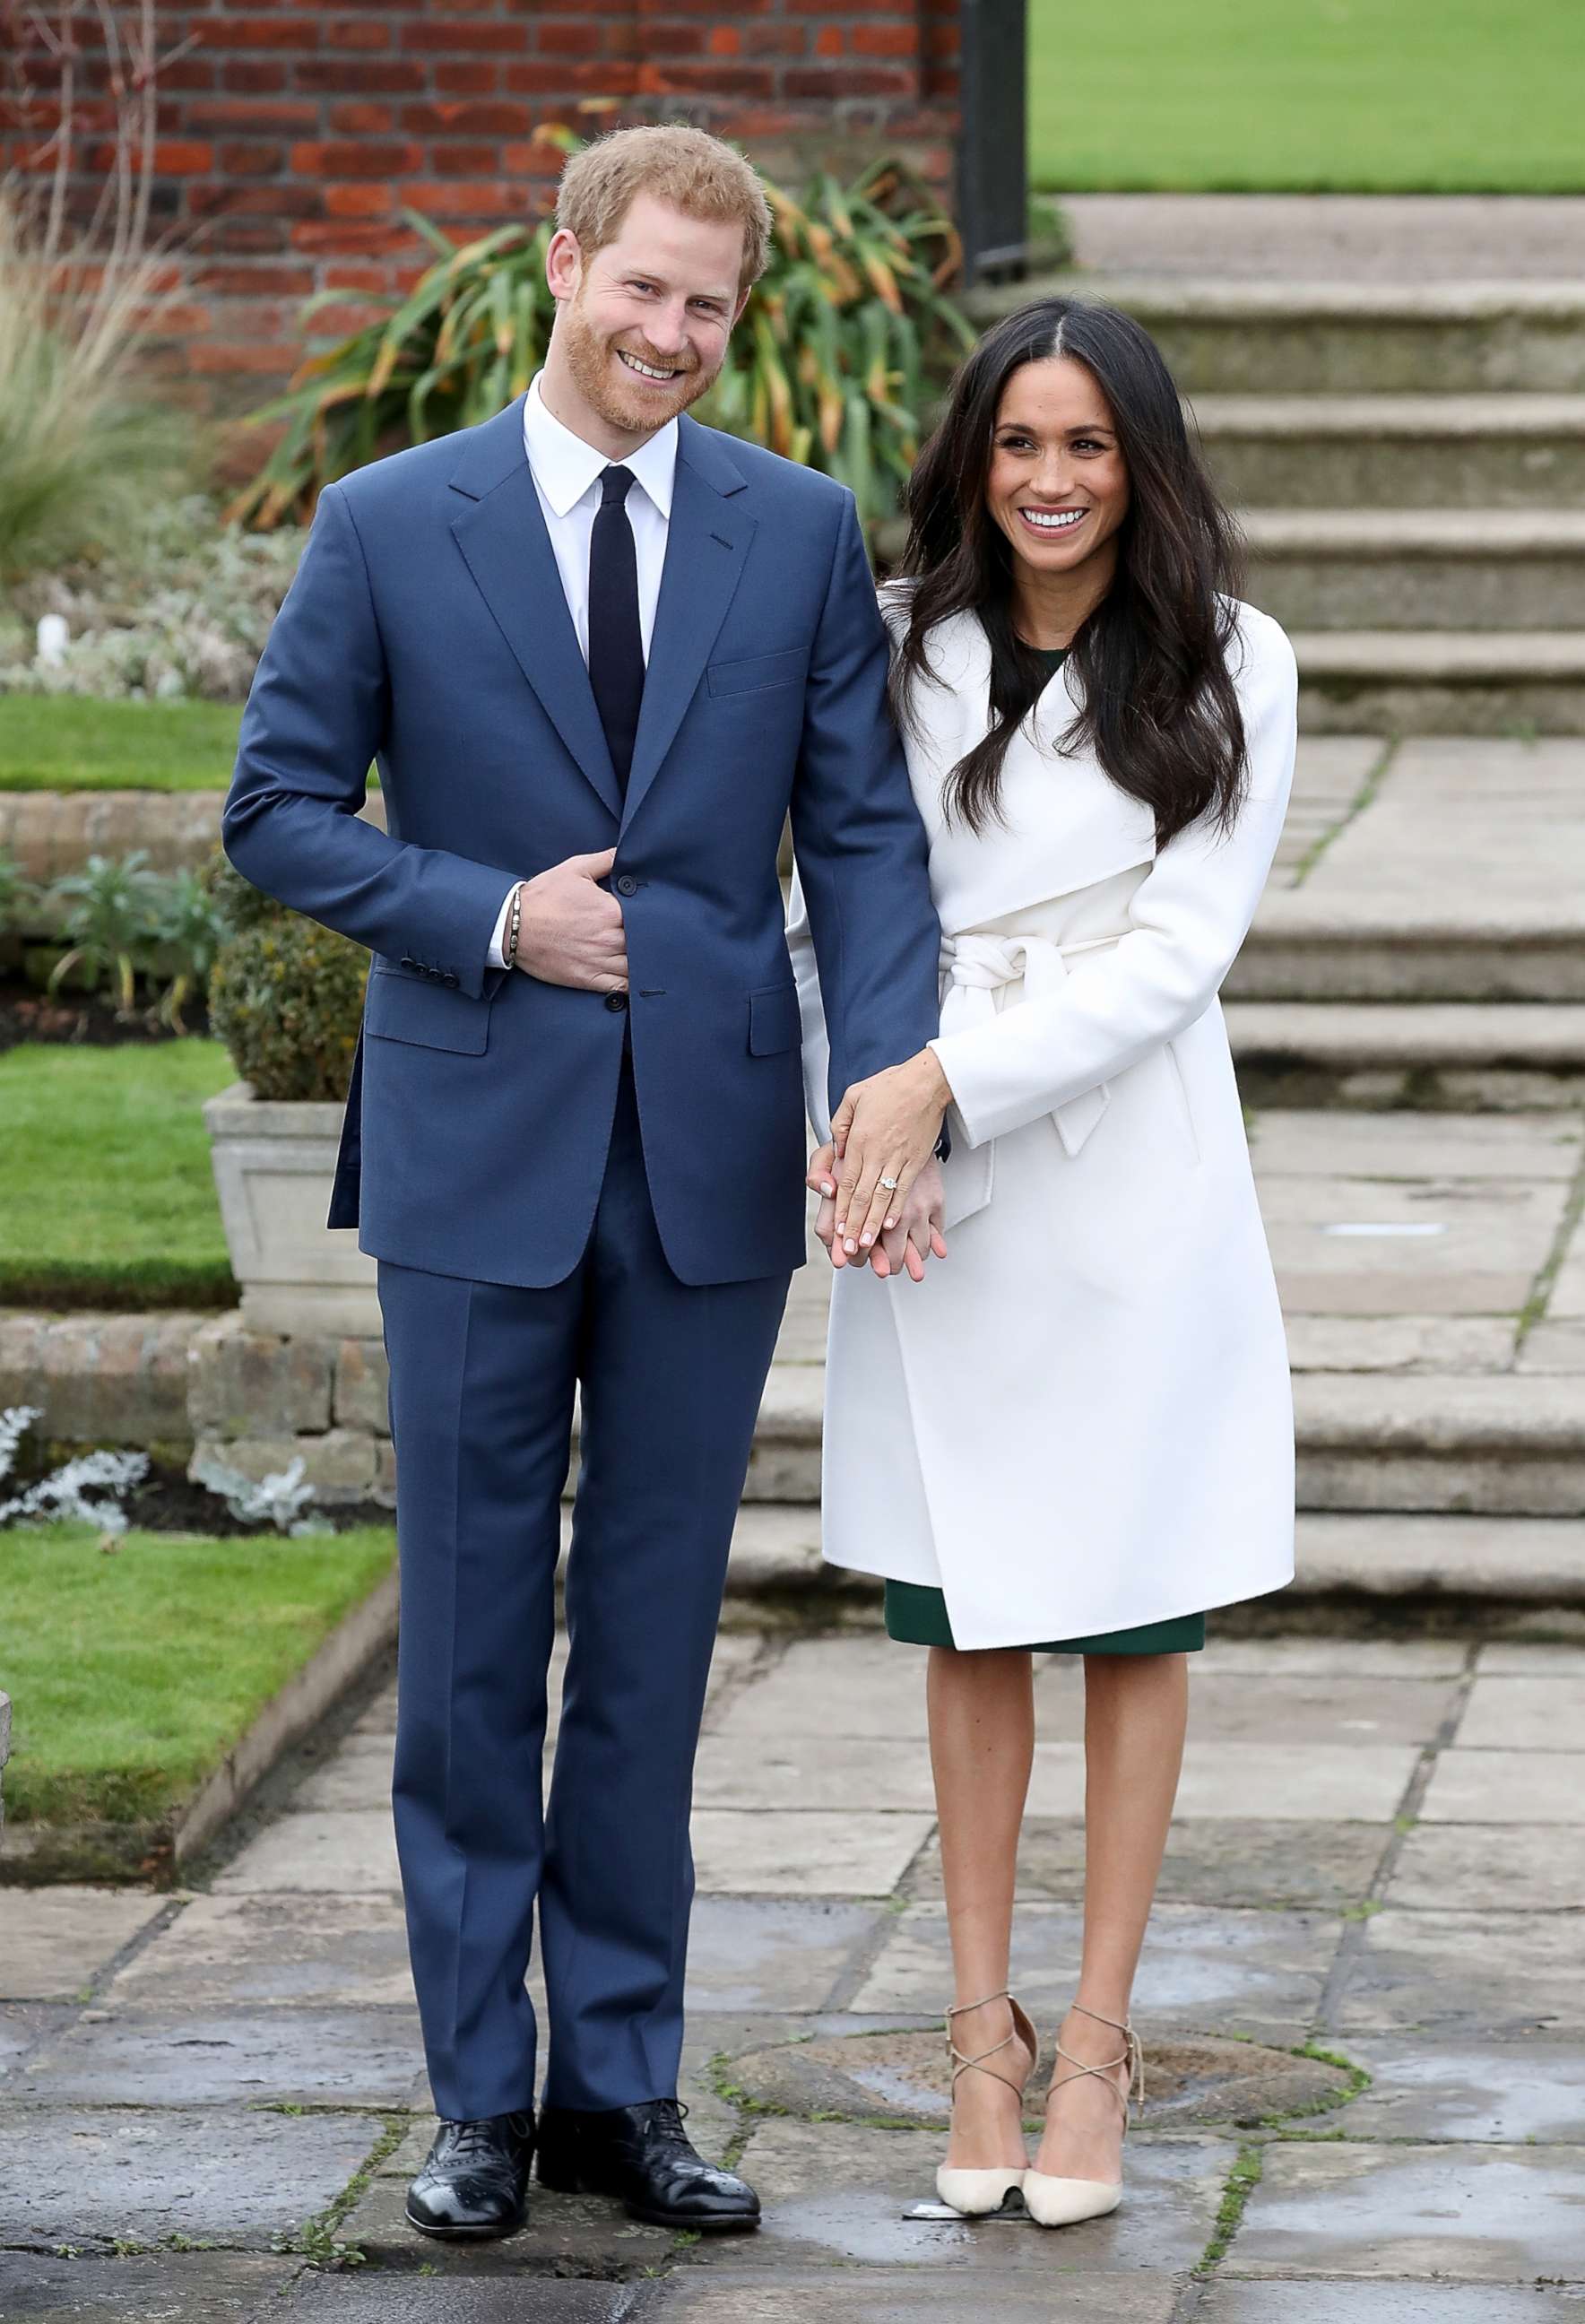 PHOTO: Prince Harry and actress Meghan Markle during an official photocall to announce their engagement at The Sunken Gardens at Kensington Palace on Nov. 27, 2017 in London.